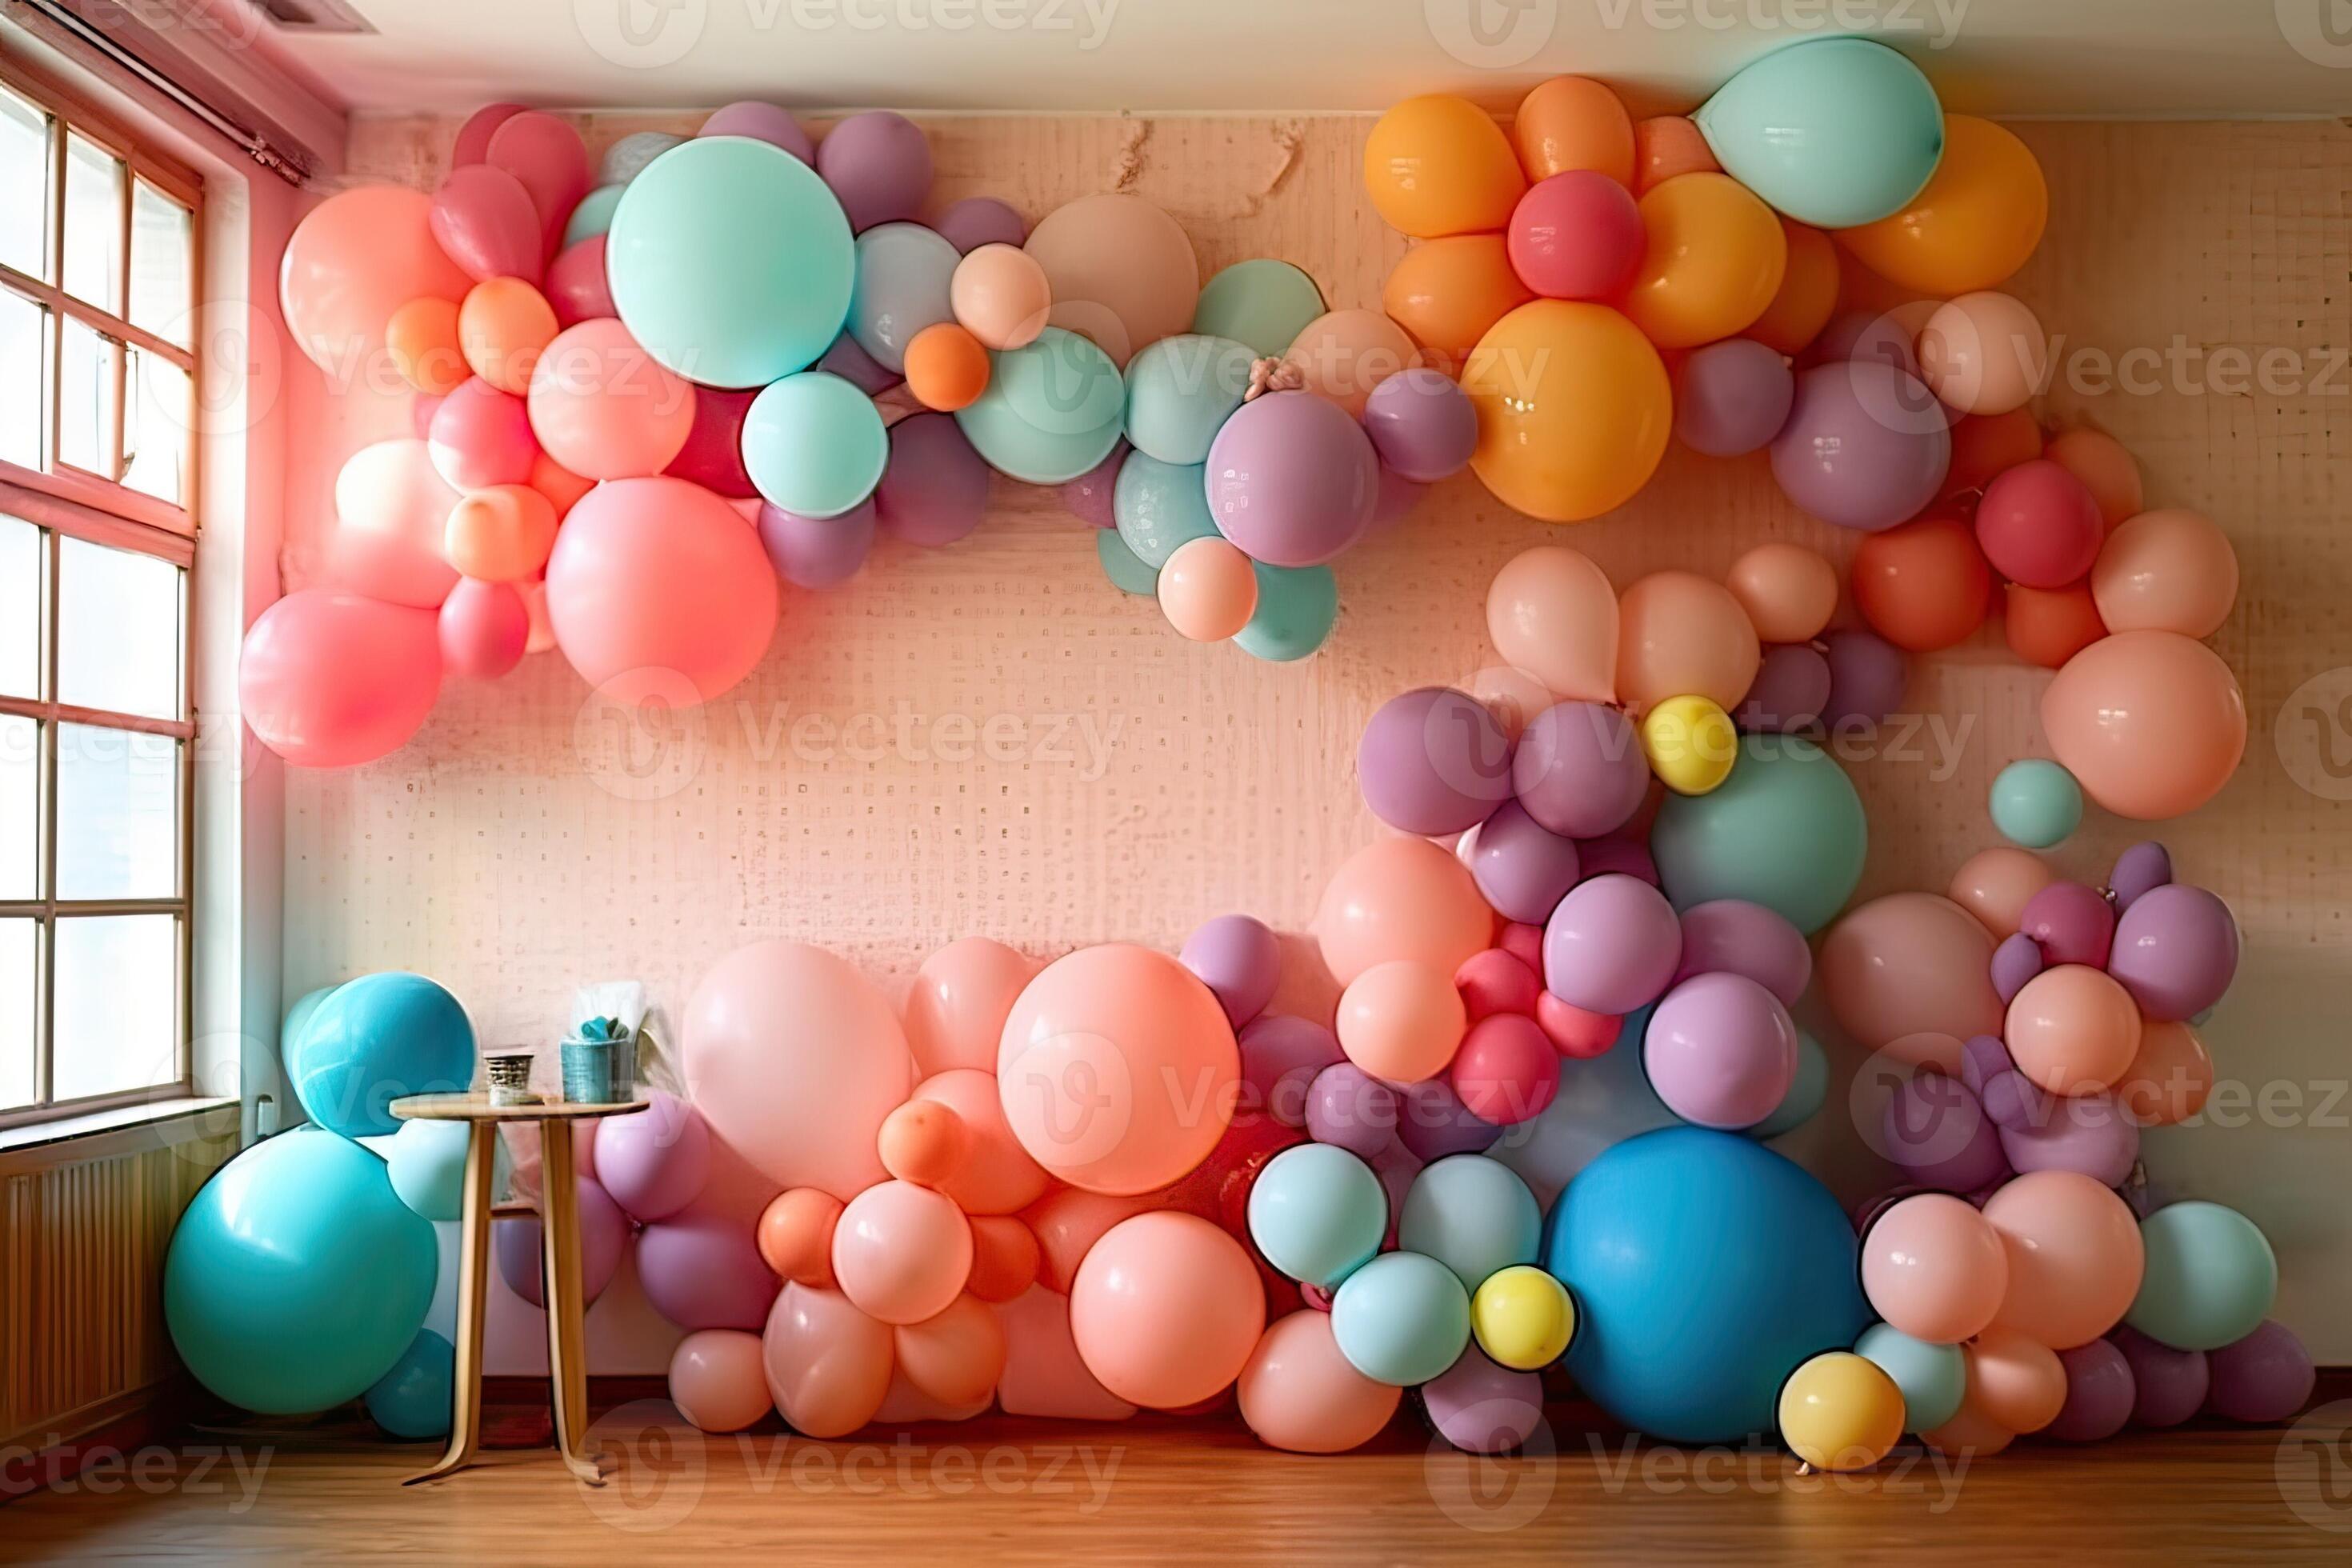 Top 20 Creative Party Decoration Ideas For Any Celebration | Adria